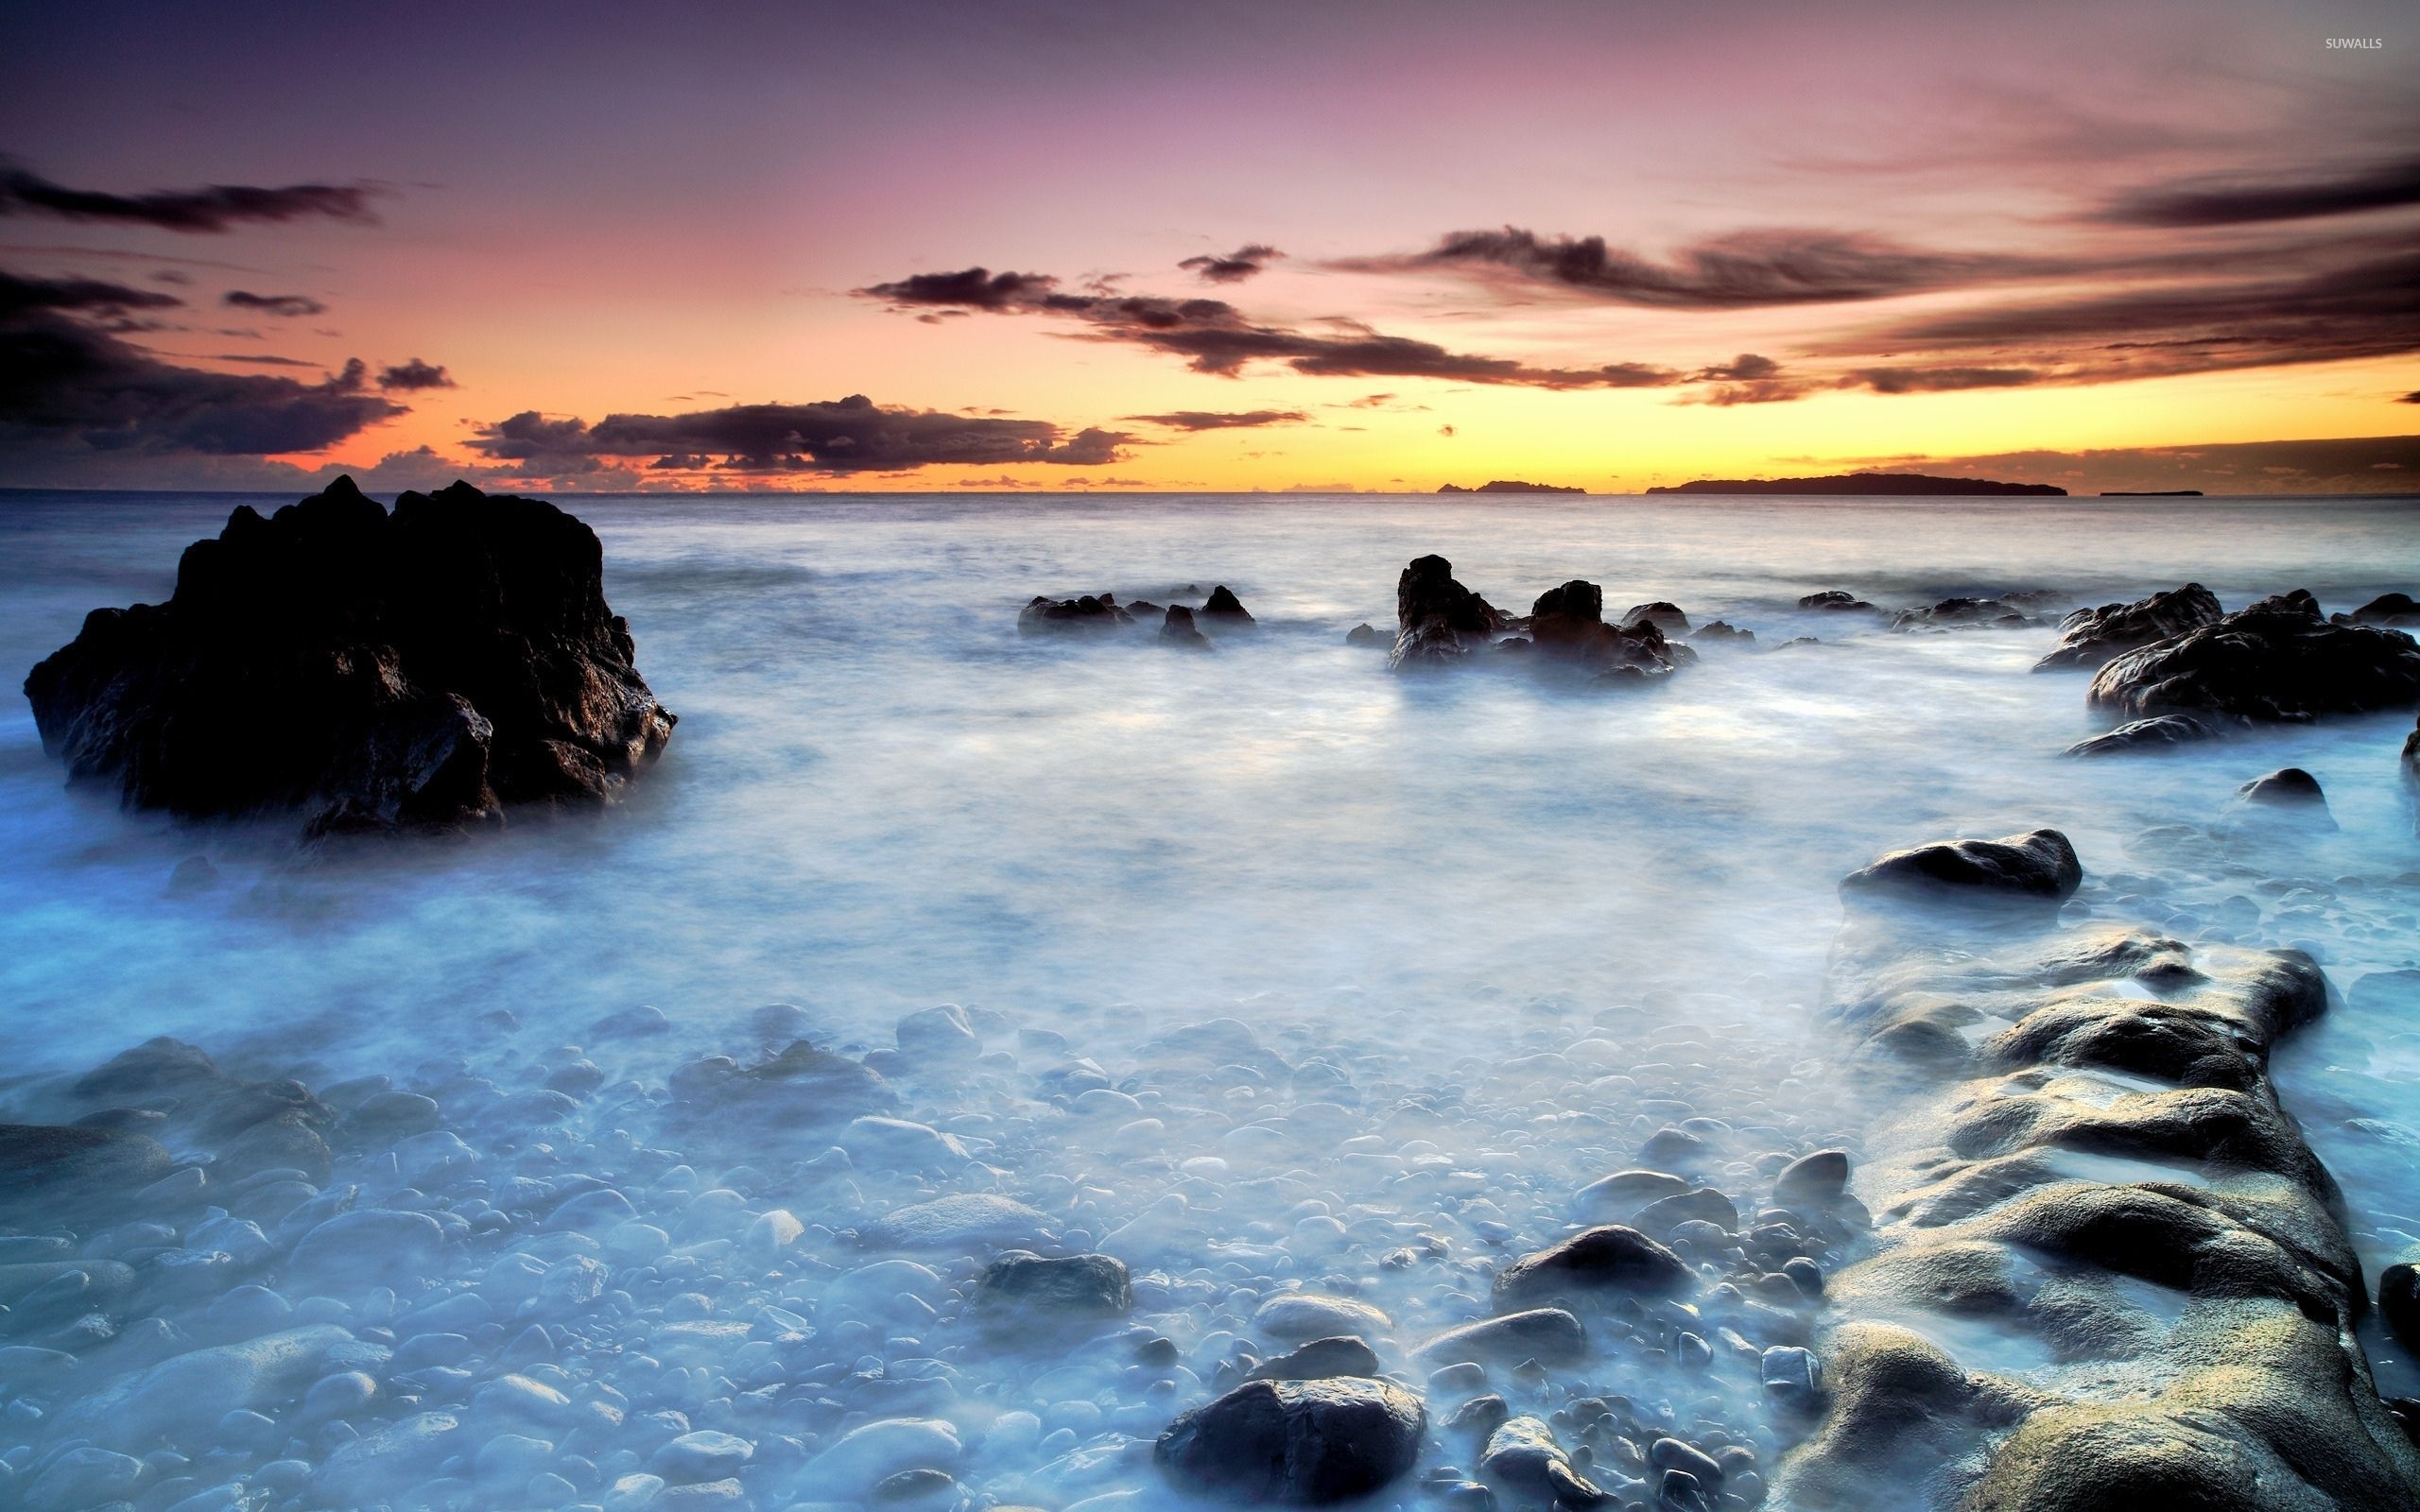 Rocks rising towards the sunset from the mysterious ocean